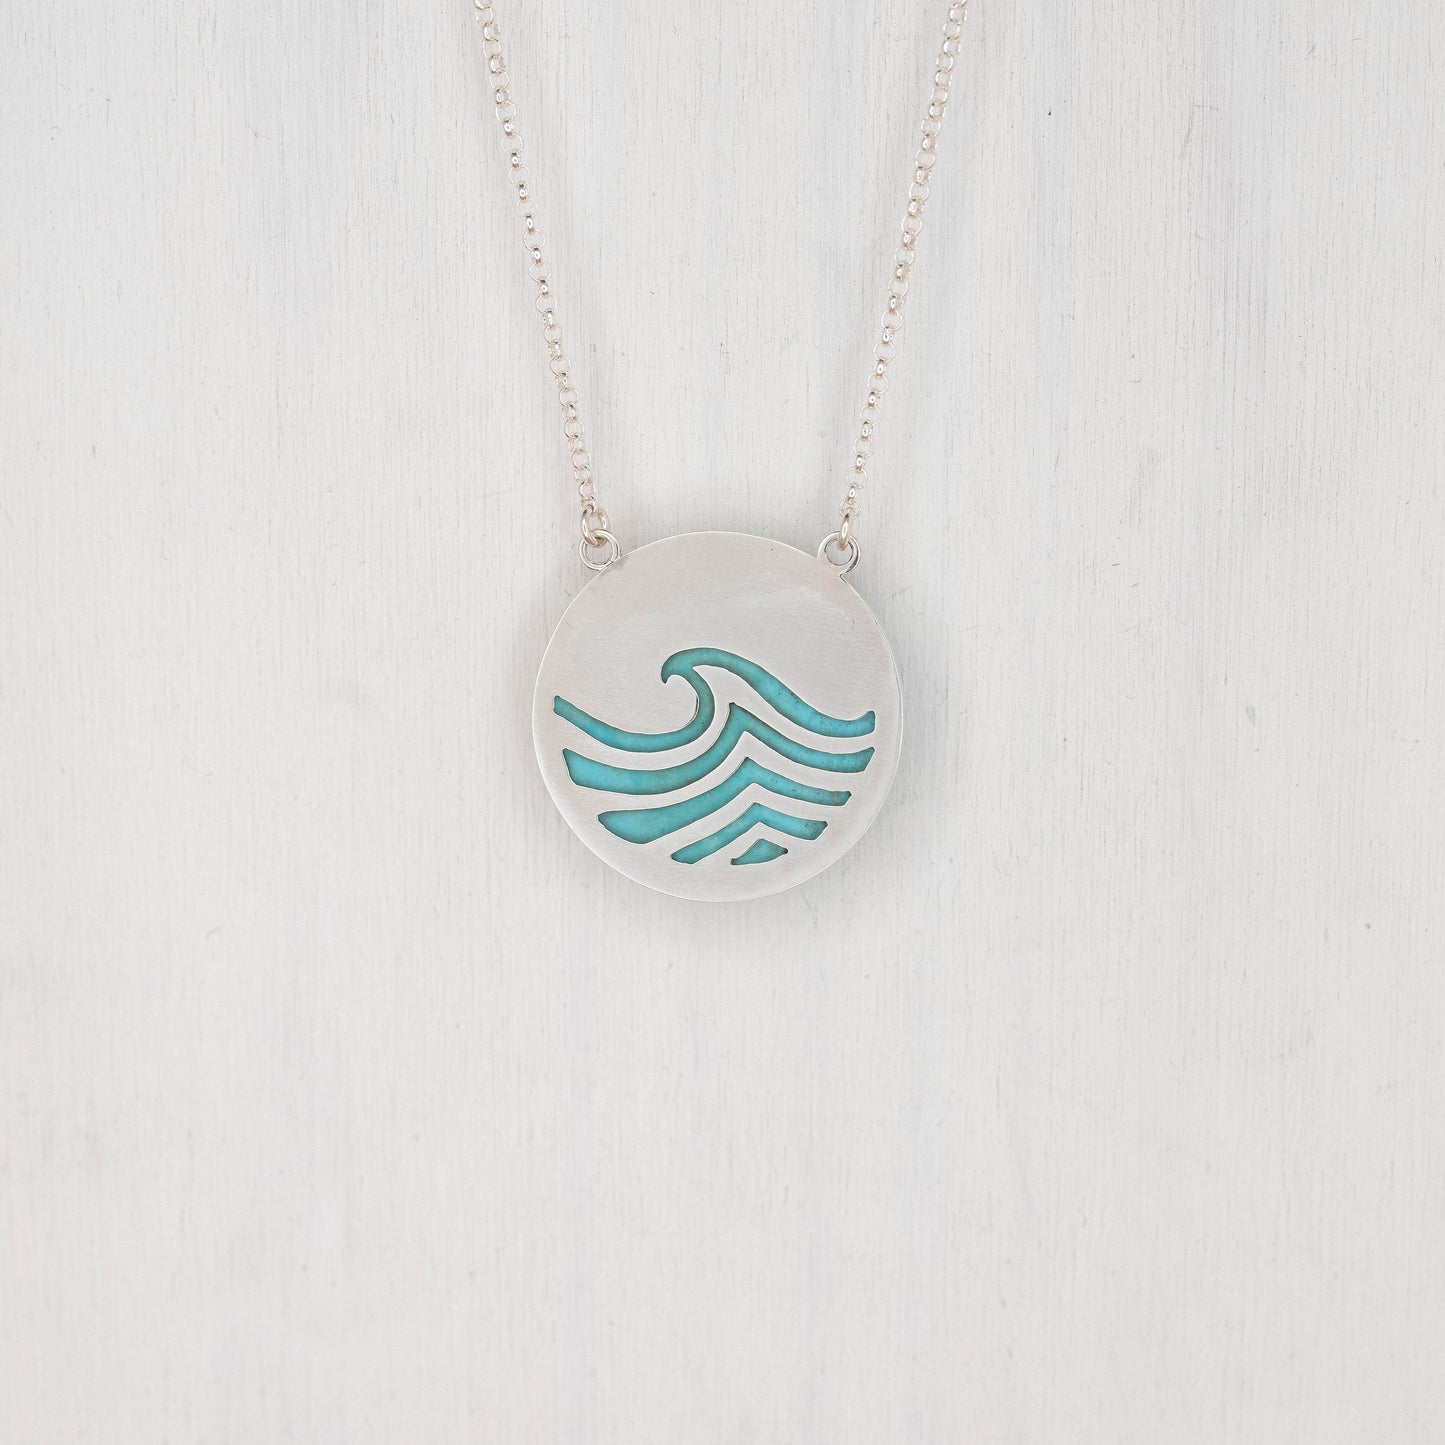 Round Turquoise Pendant with a Wave